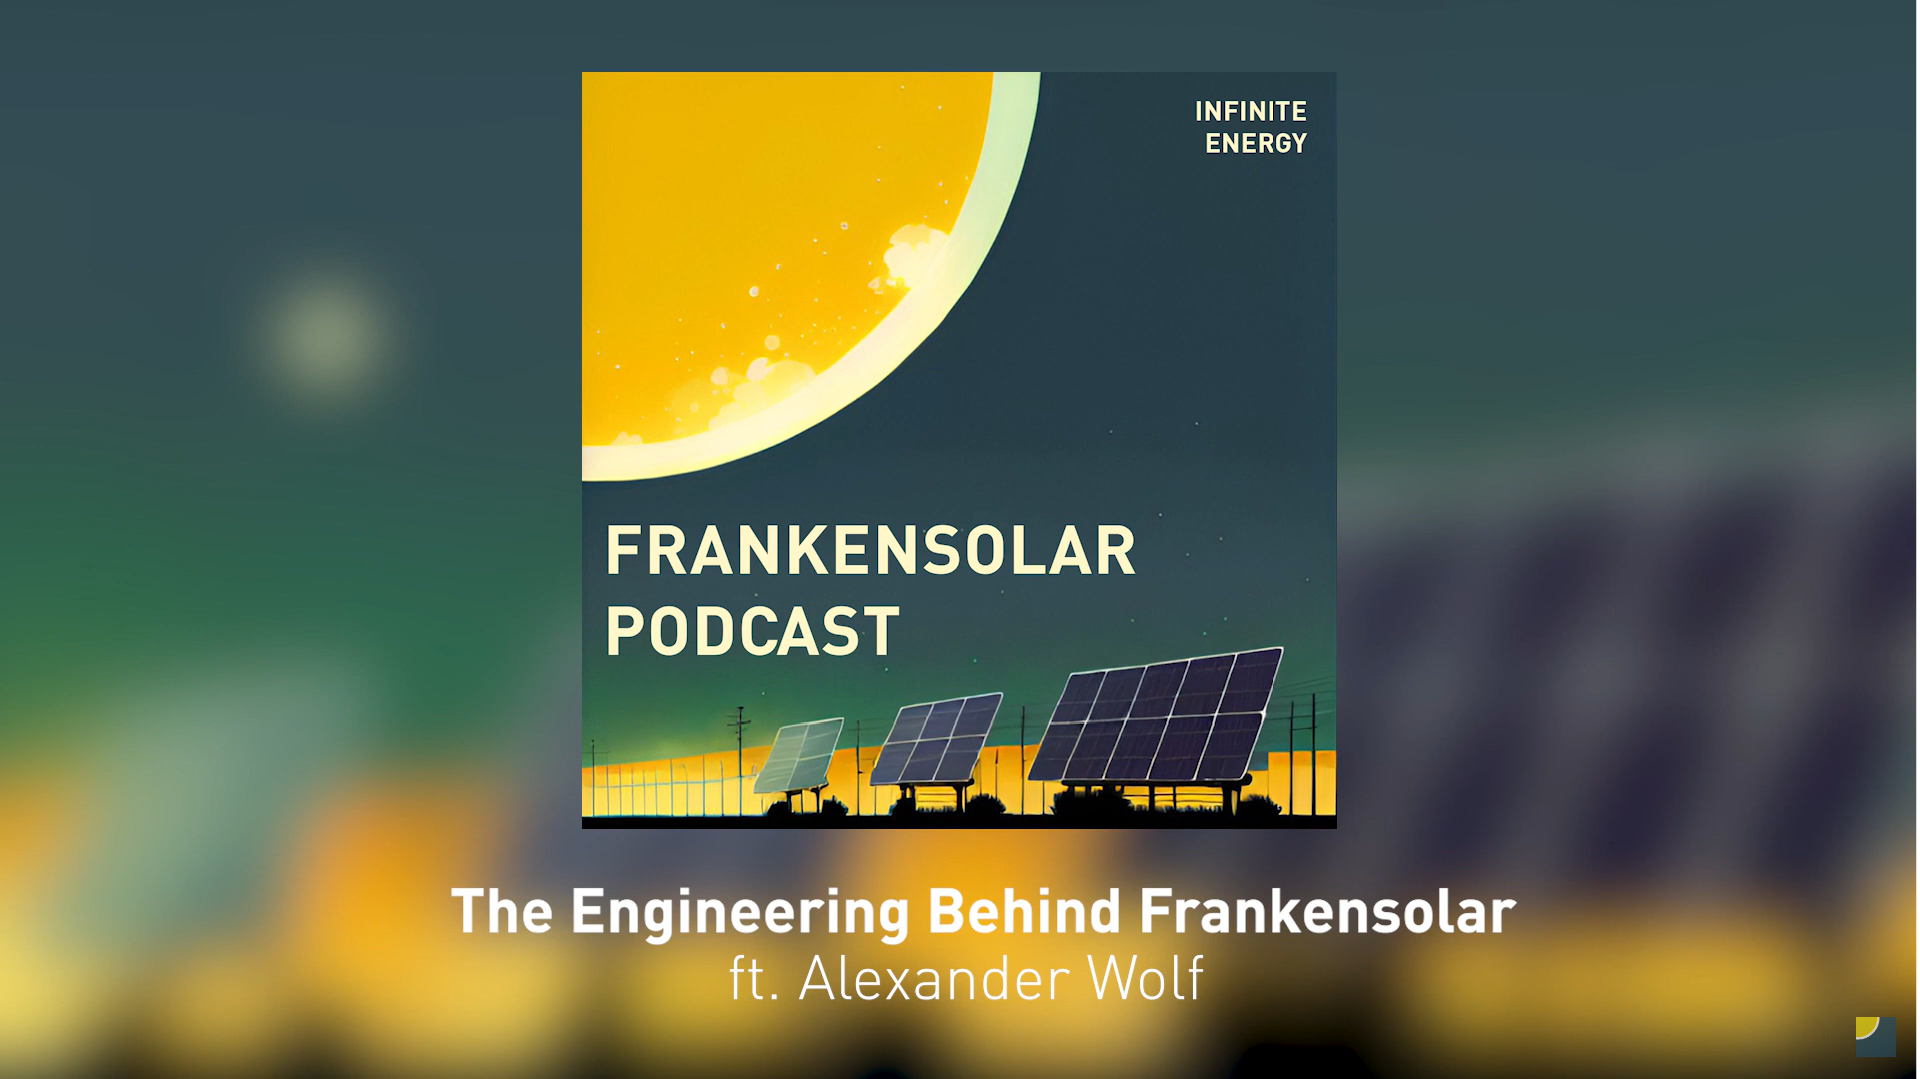 The Engineering Behind Frankensolar – Infinite Energy Podcast #1